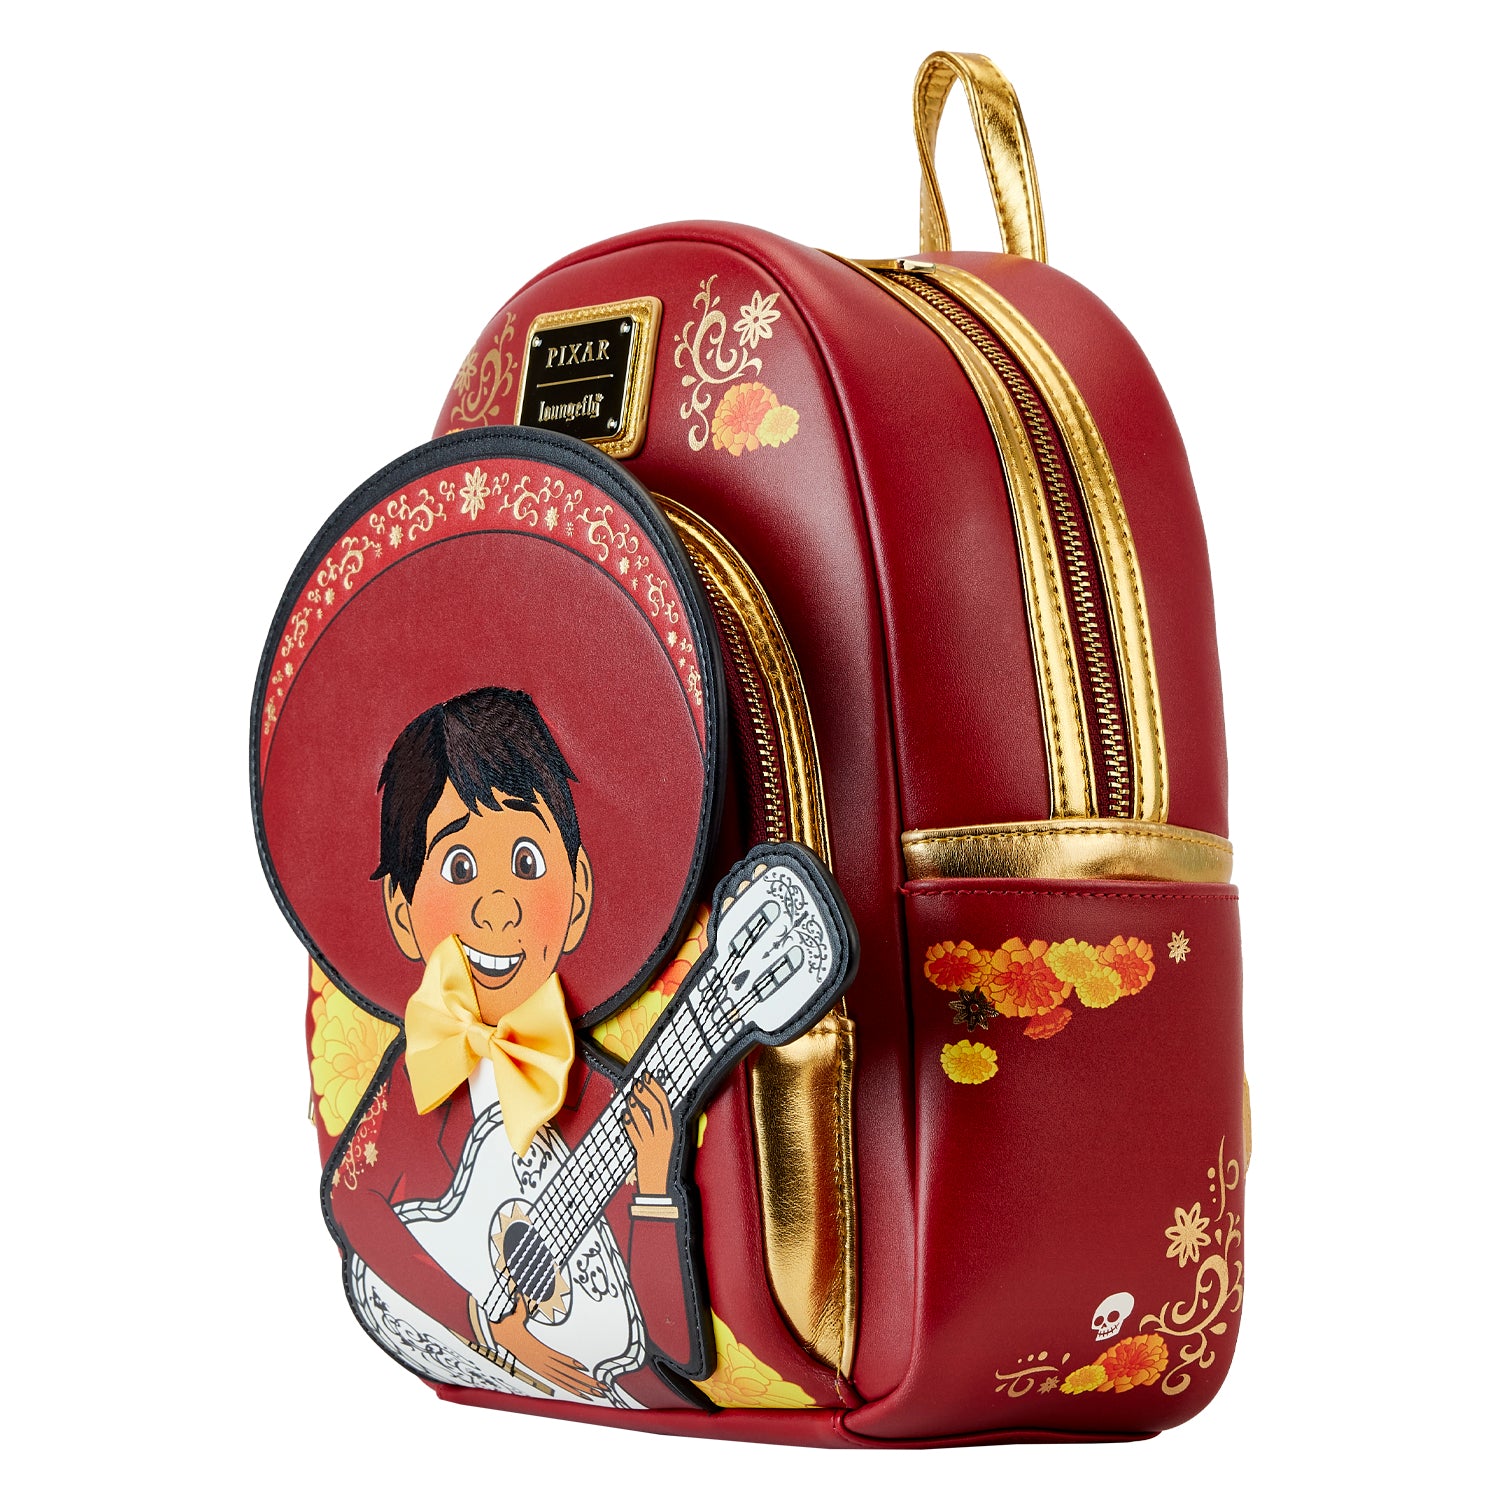 Loungefly Disney Pixar Coco Miguel Cosplay Mini Backpack